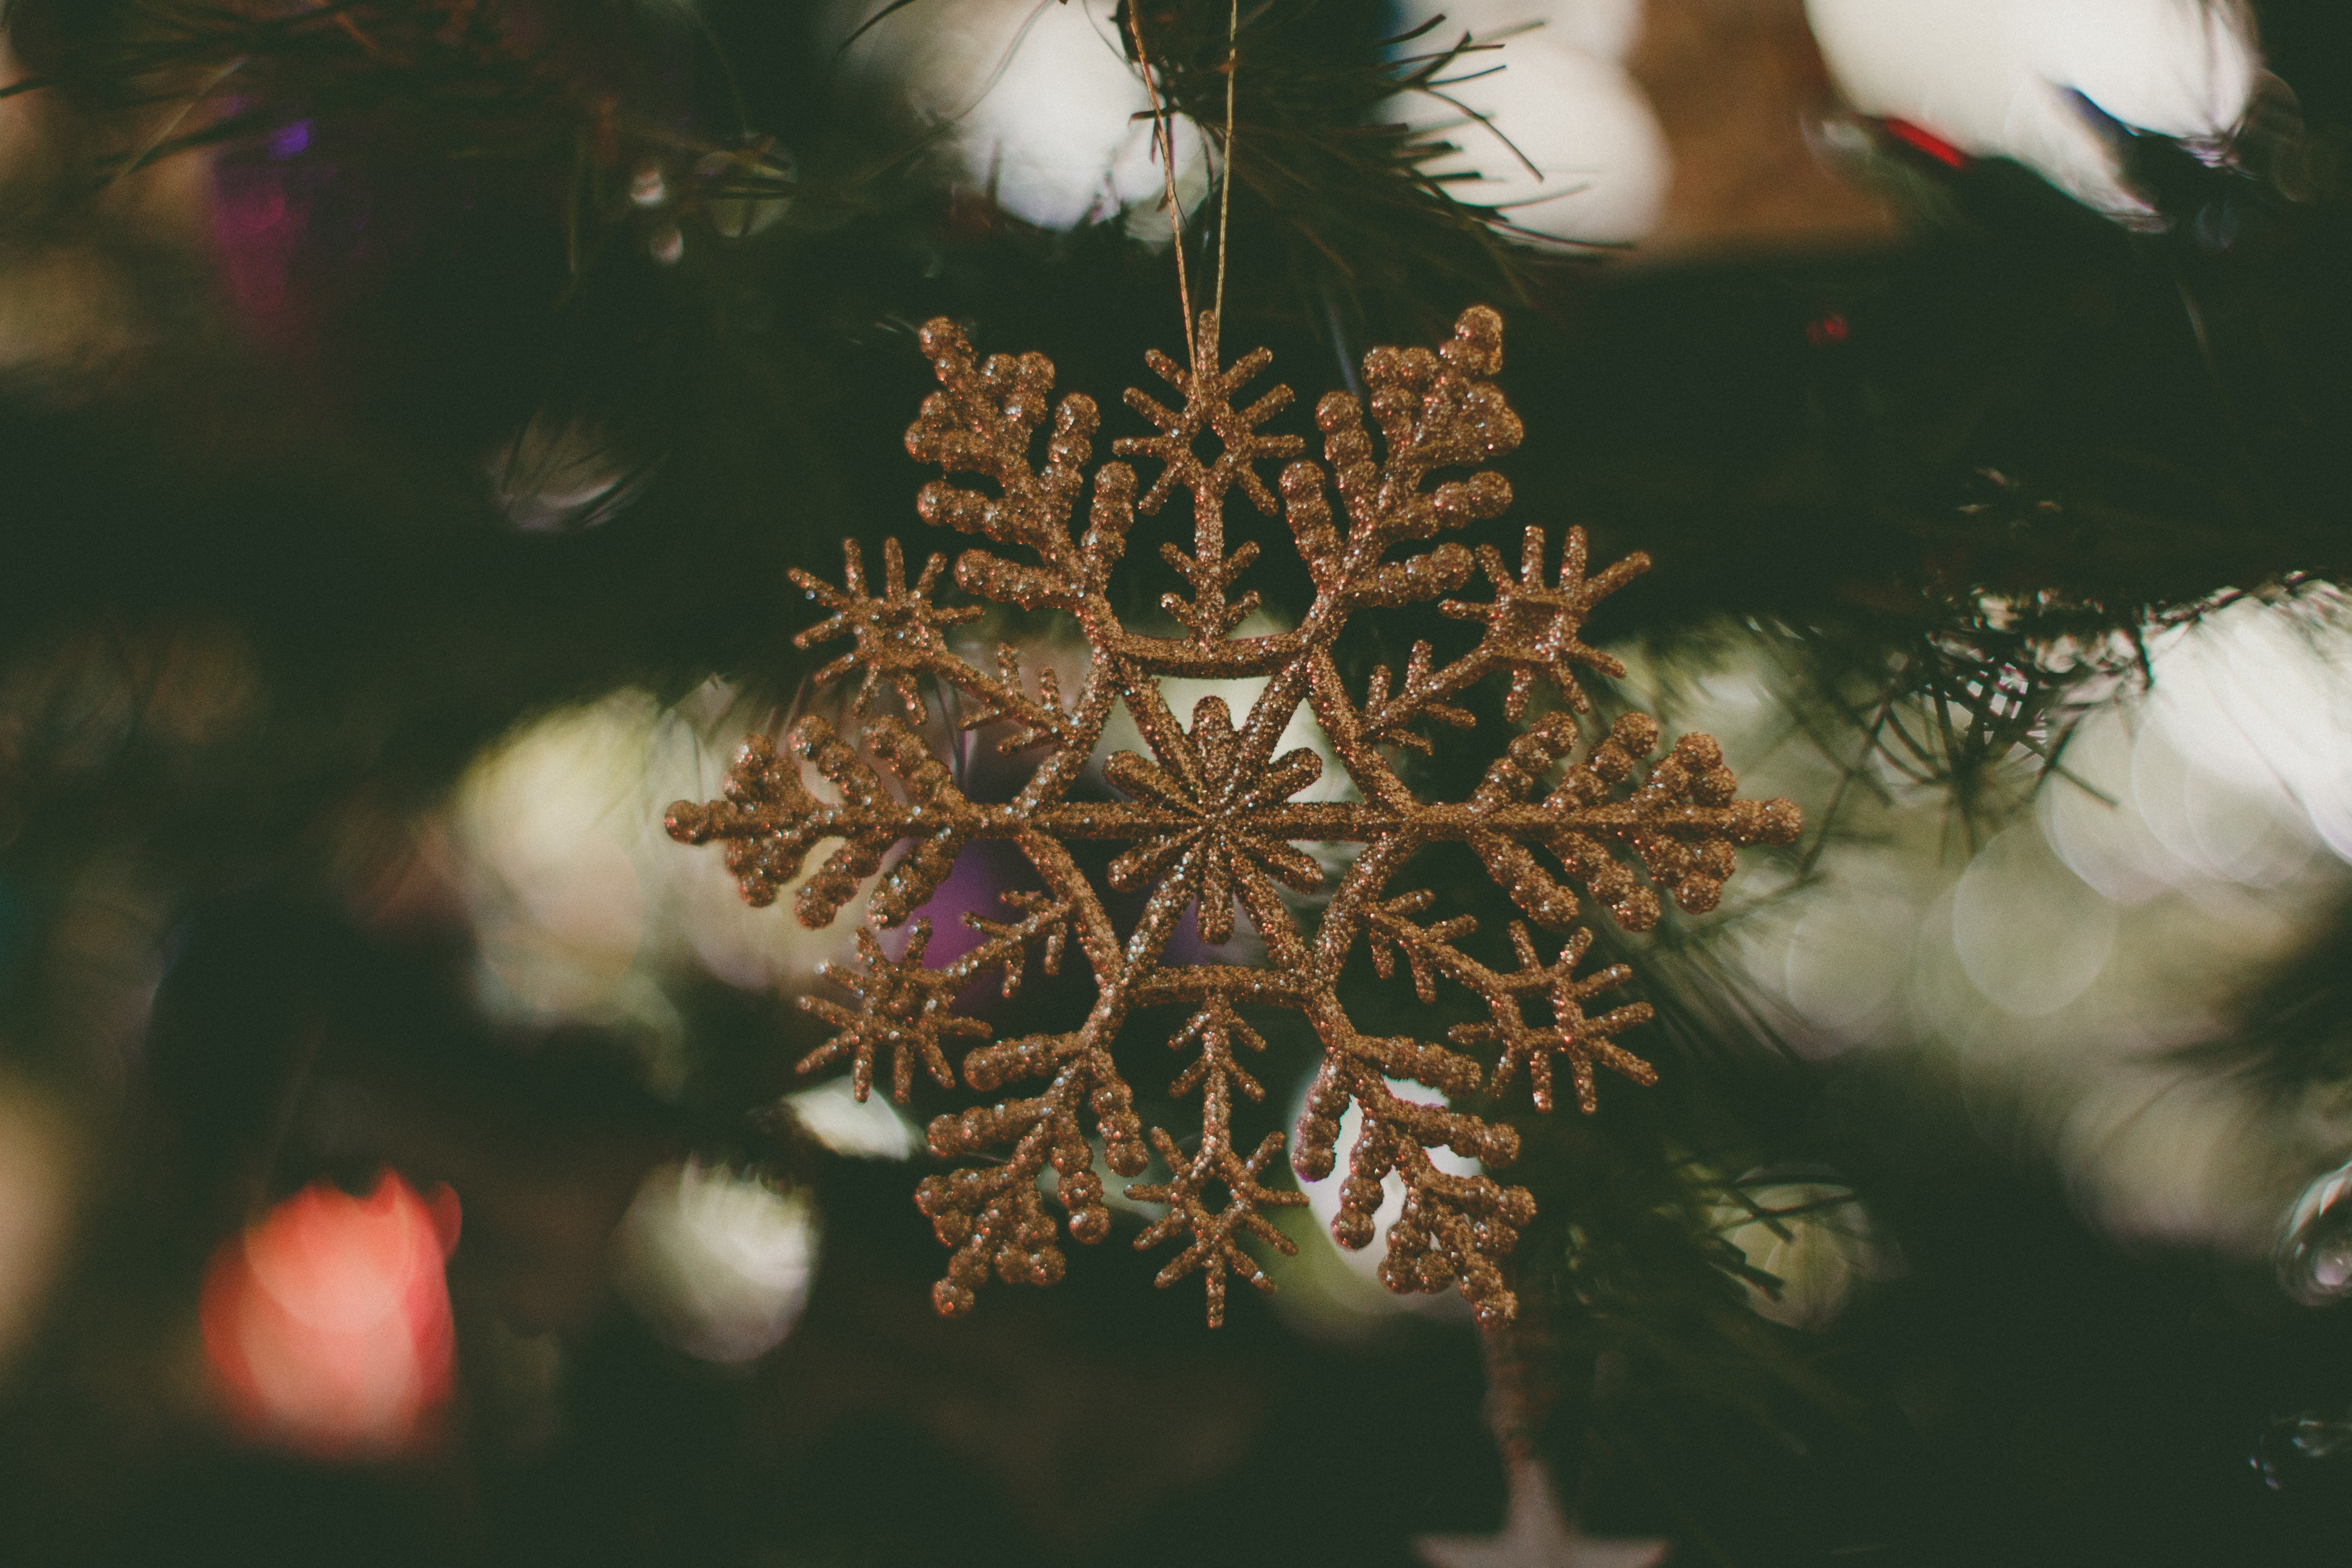 hanged silver snowflake christmas tree ornament close-up focus photo